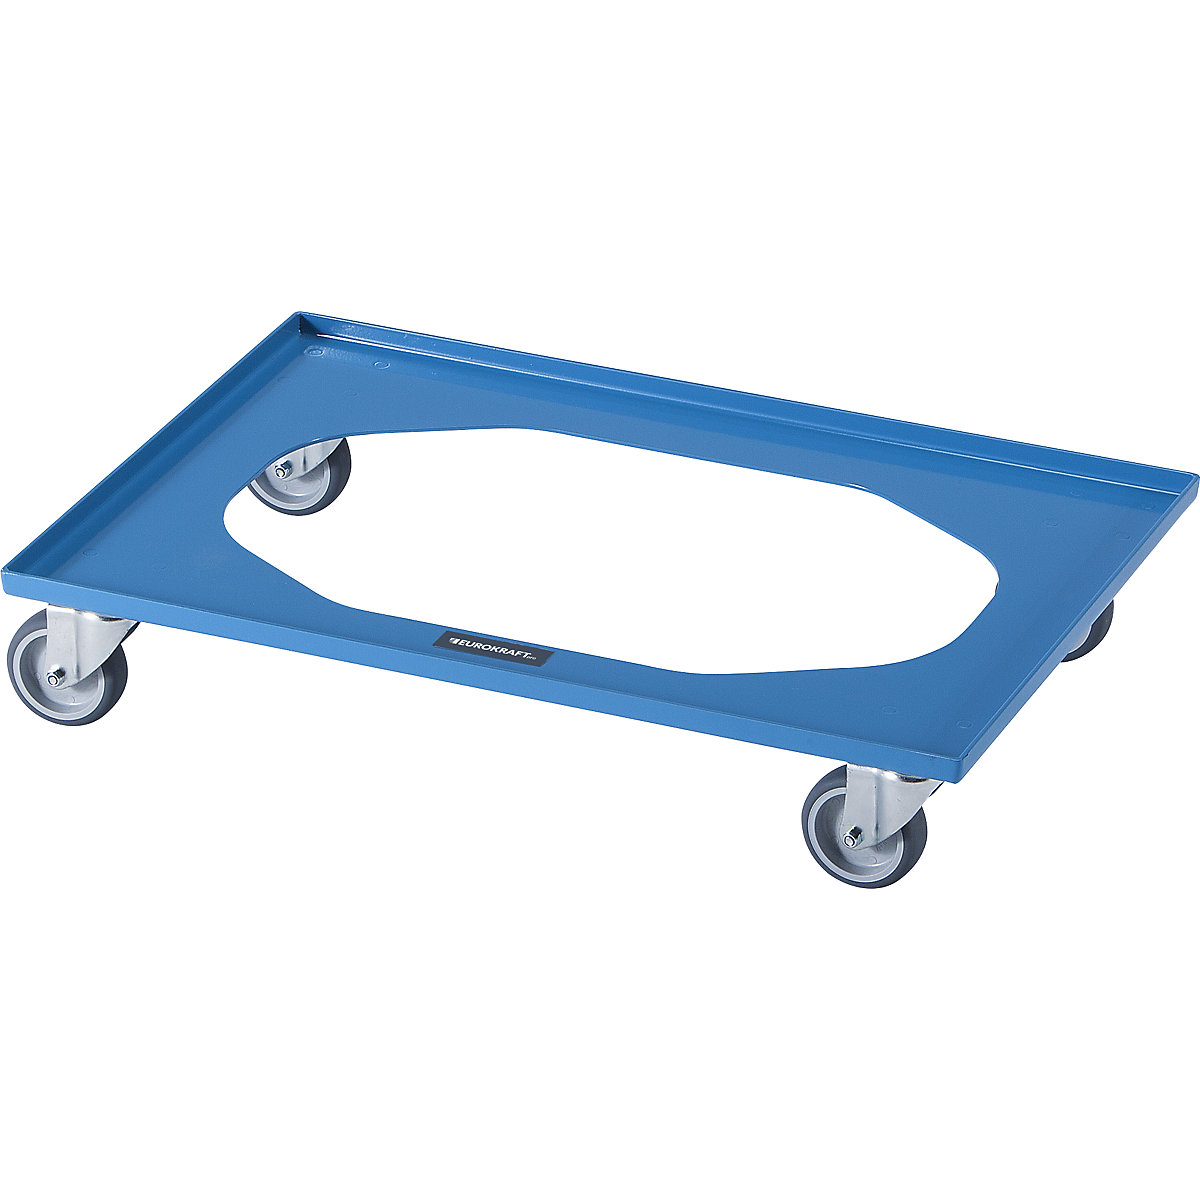 NEO transport dolly – eurokraft pro, for Euro formats 800 x 600 mm, max. load 250 kg, 5+ items-6